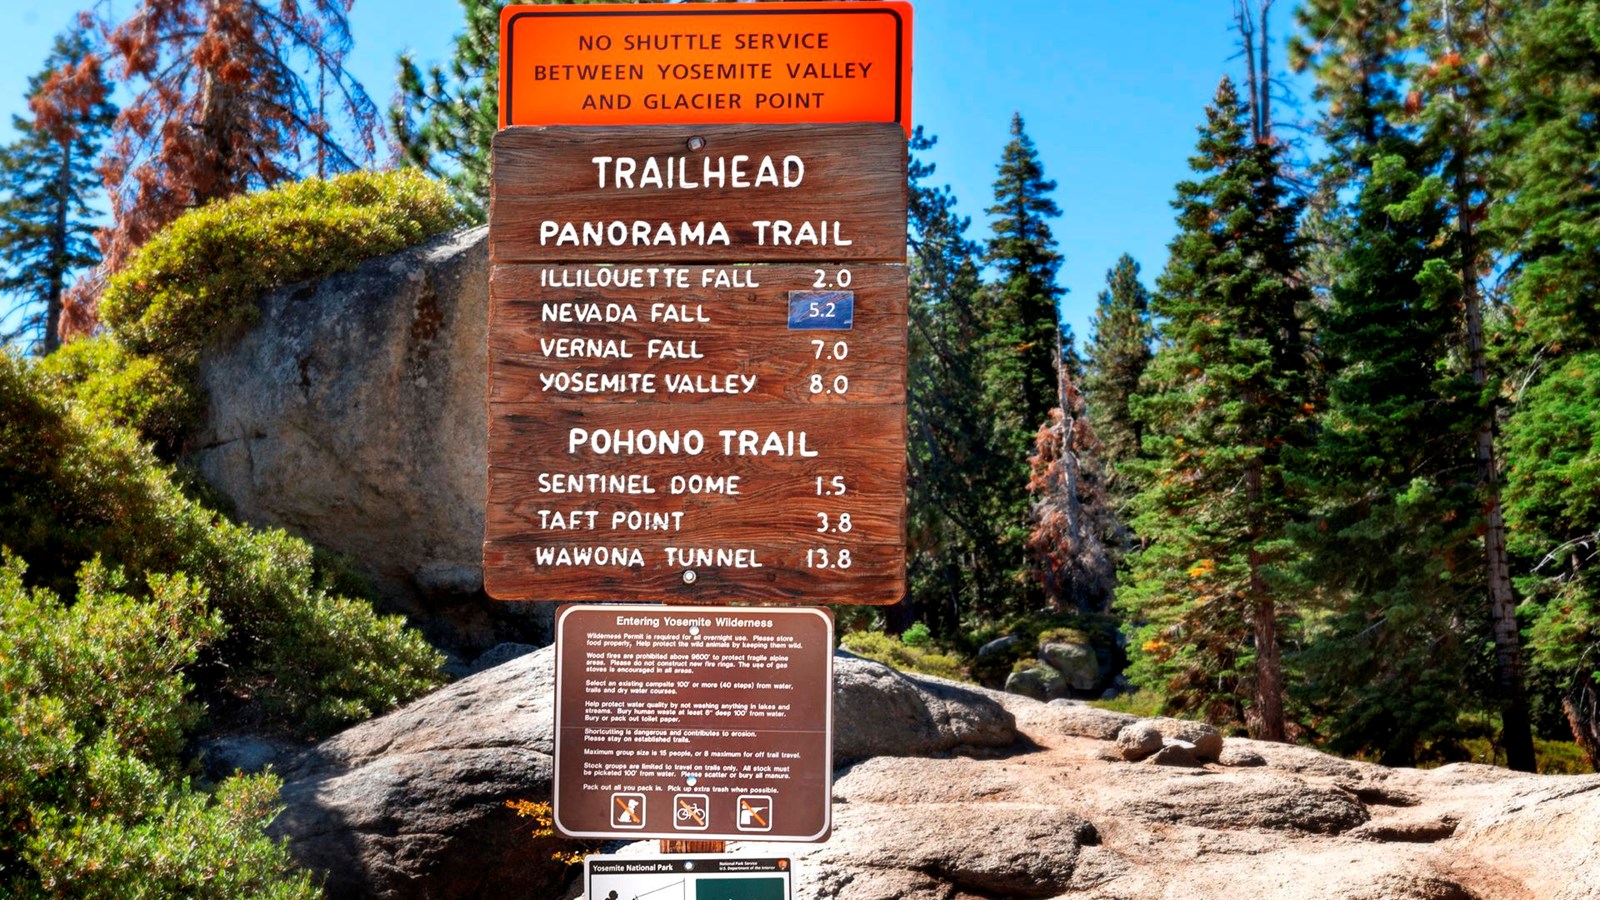 Wooden and metal signs at the trailhead